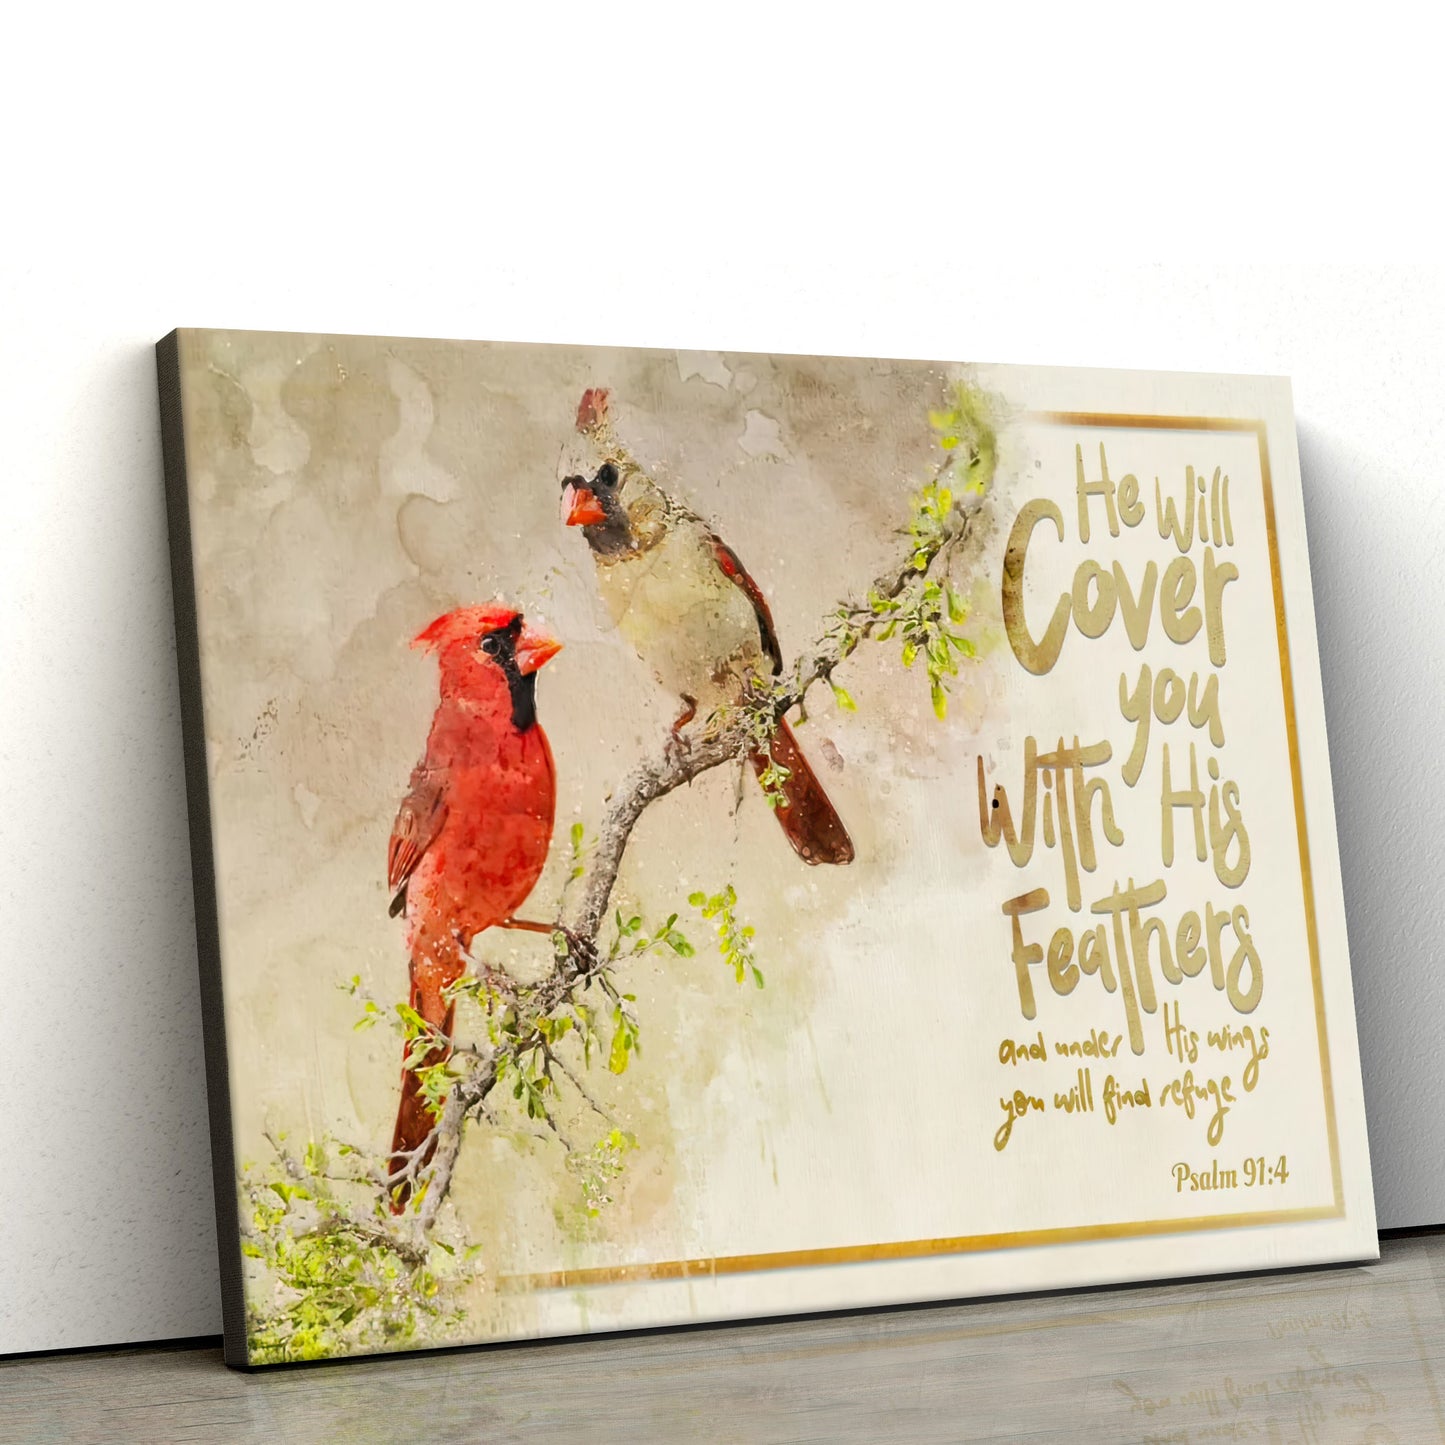 He Will Cover You With His Feathers Wall Art Canvas - Couple Cardinal Christian Decor